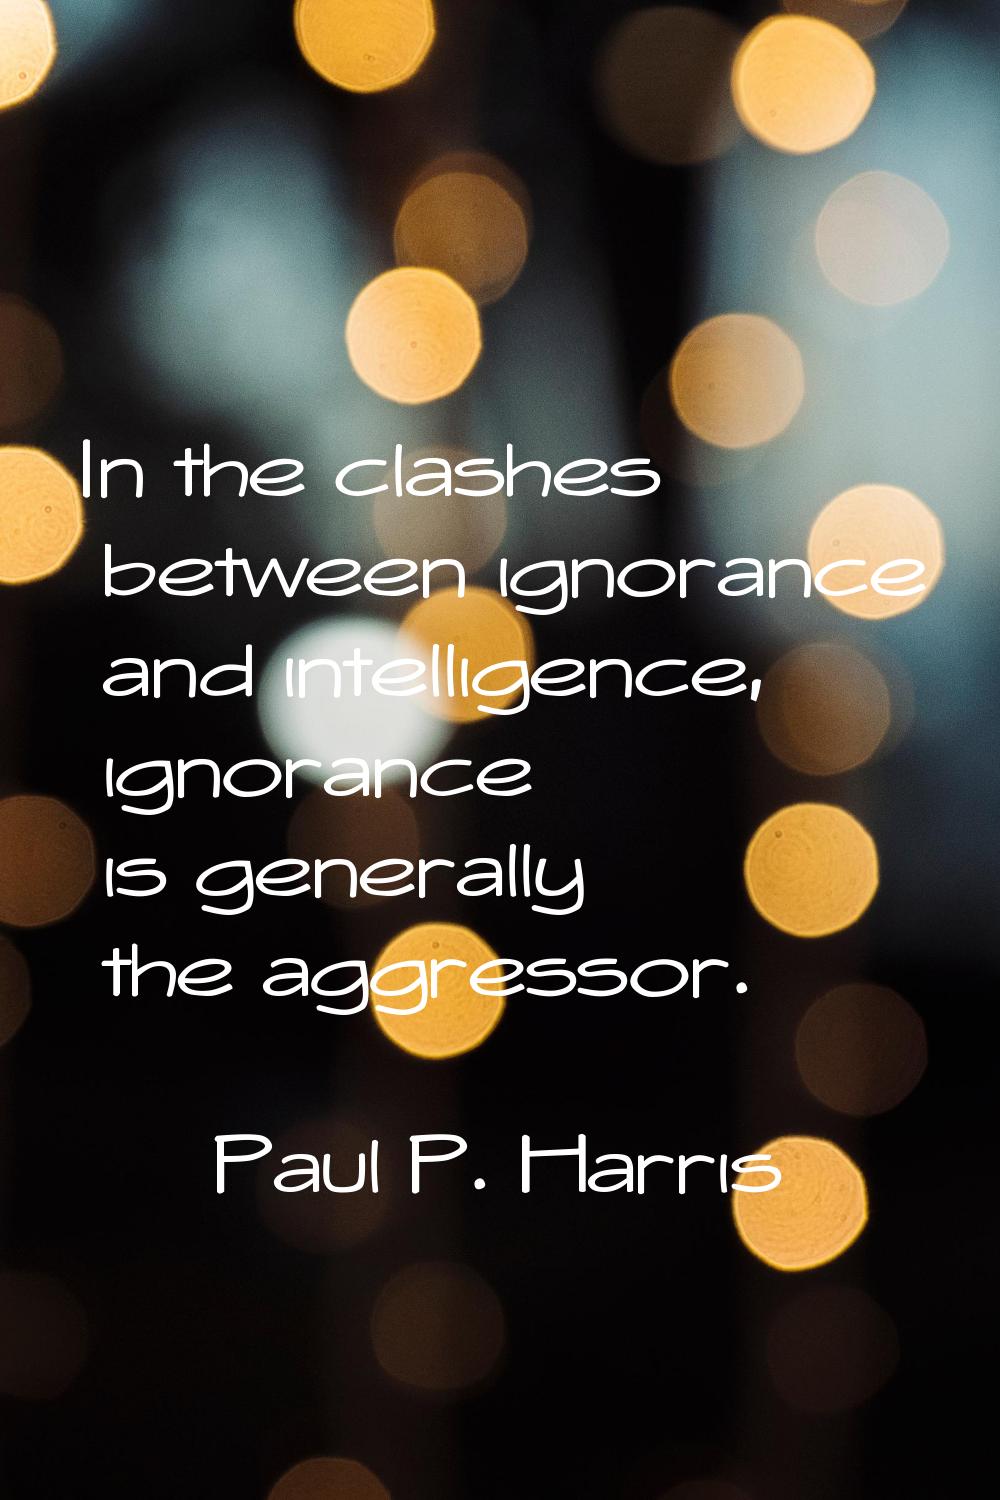 In the clashes between ignorance and intelligence, ignorance is generally the aggressor.